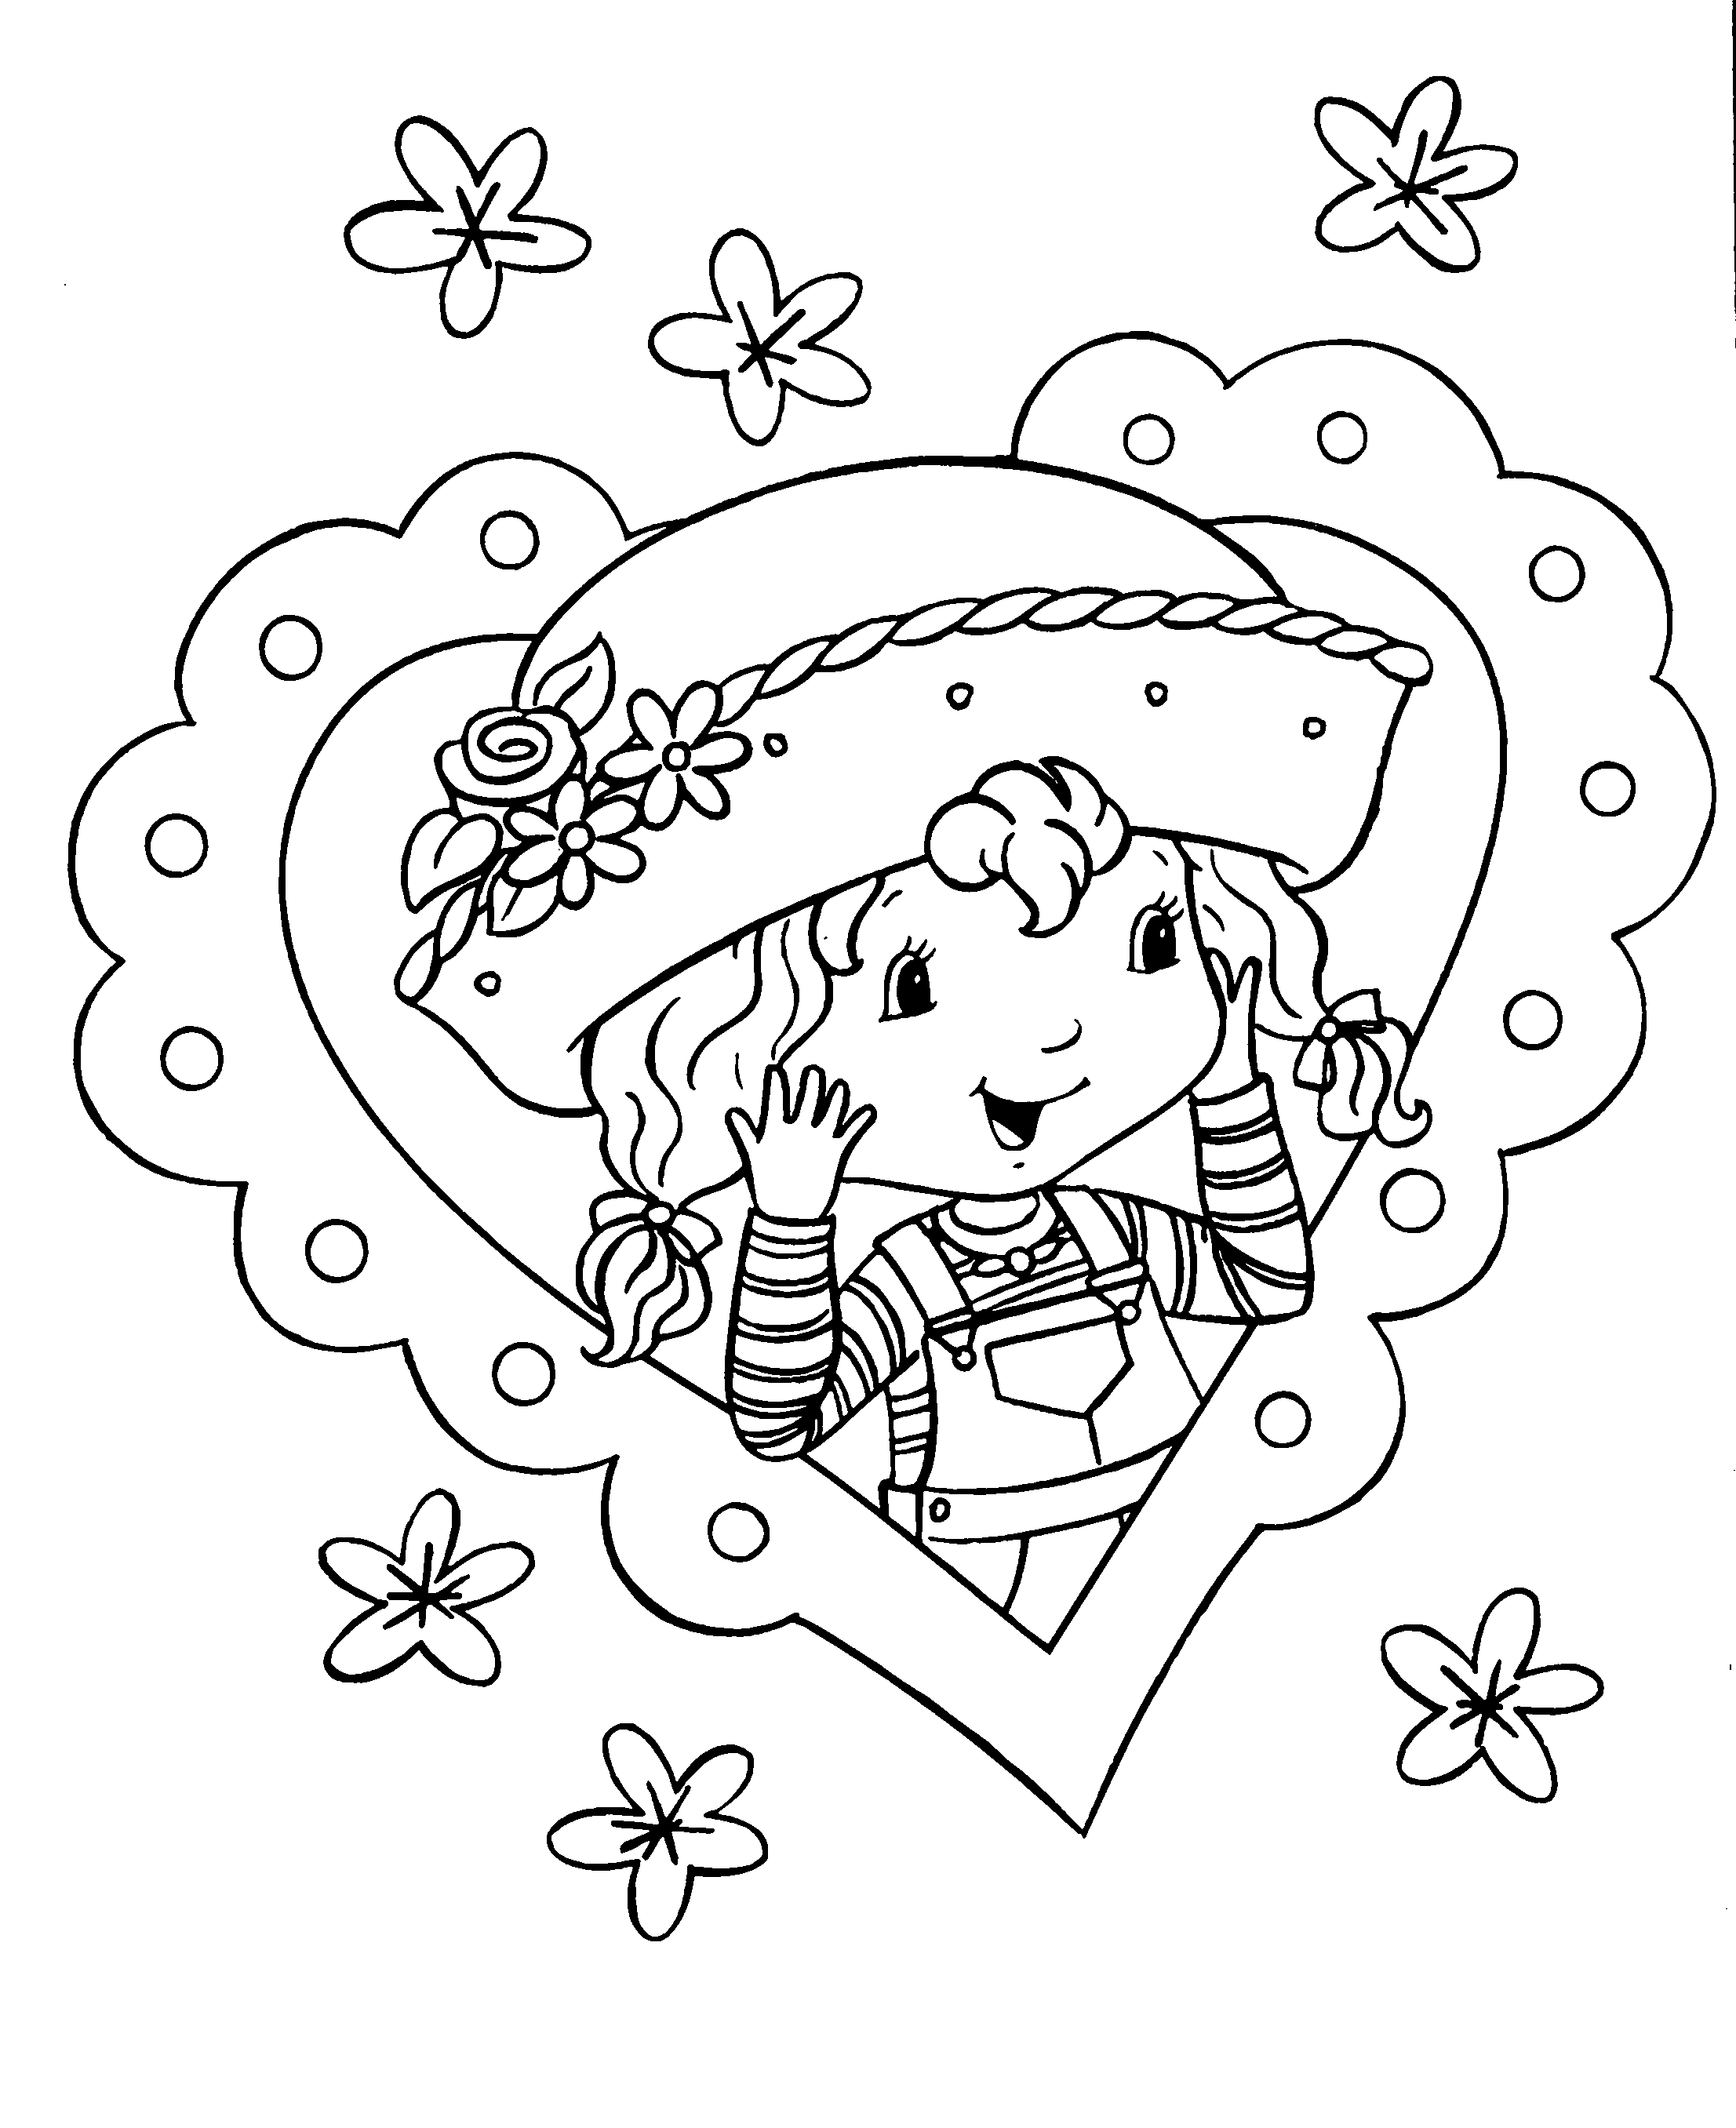 strawberry shortcake characters coloring pages original strawberry shortcake coloring page strawberry pages characters shortcake coloring 